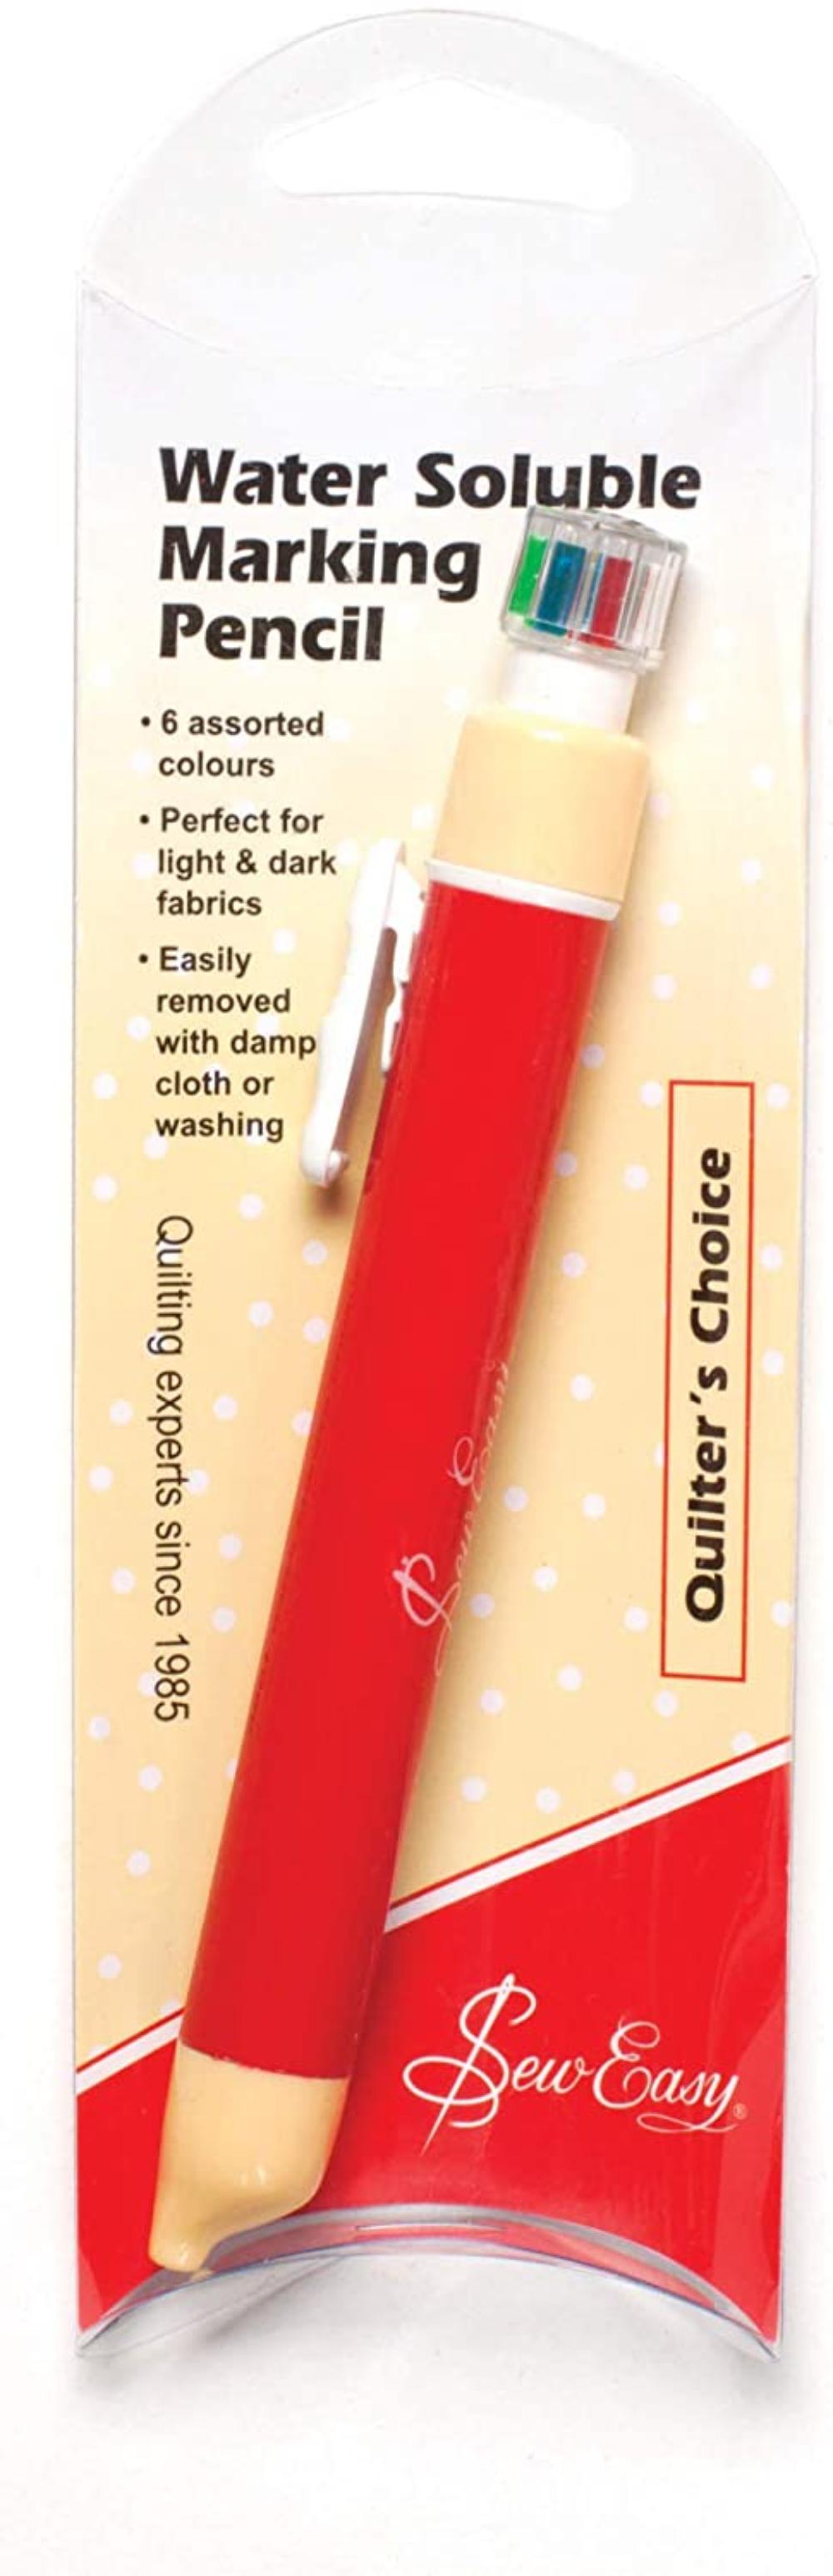 Quilter's choice- Water Soluble Marking Pencil, 6 assorted colors in 1